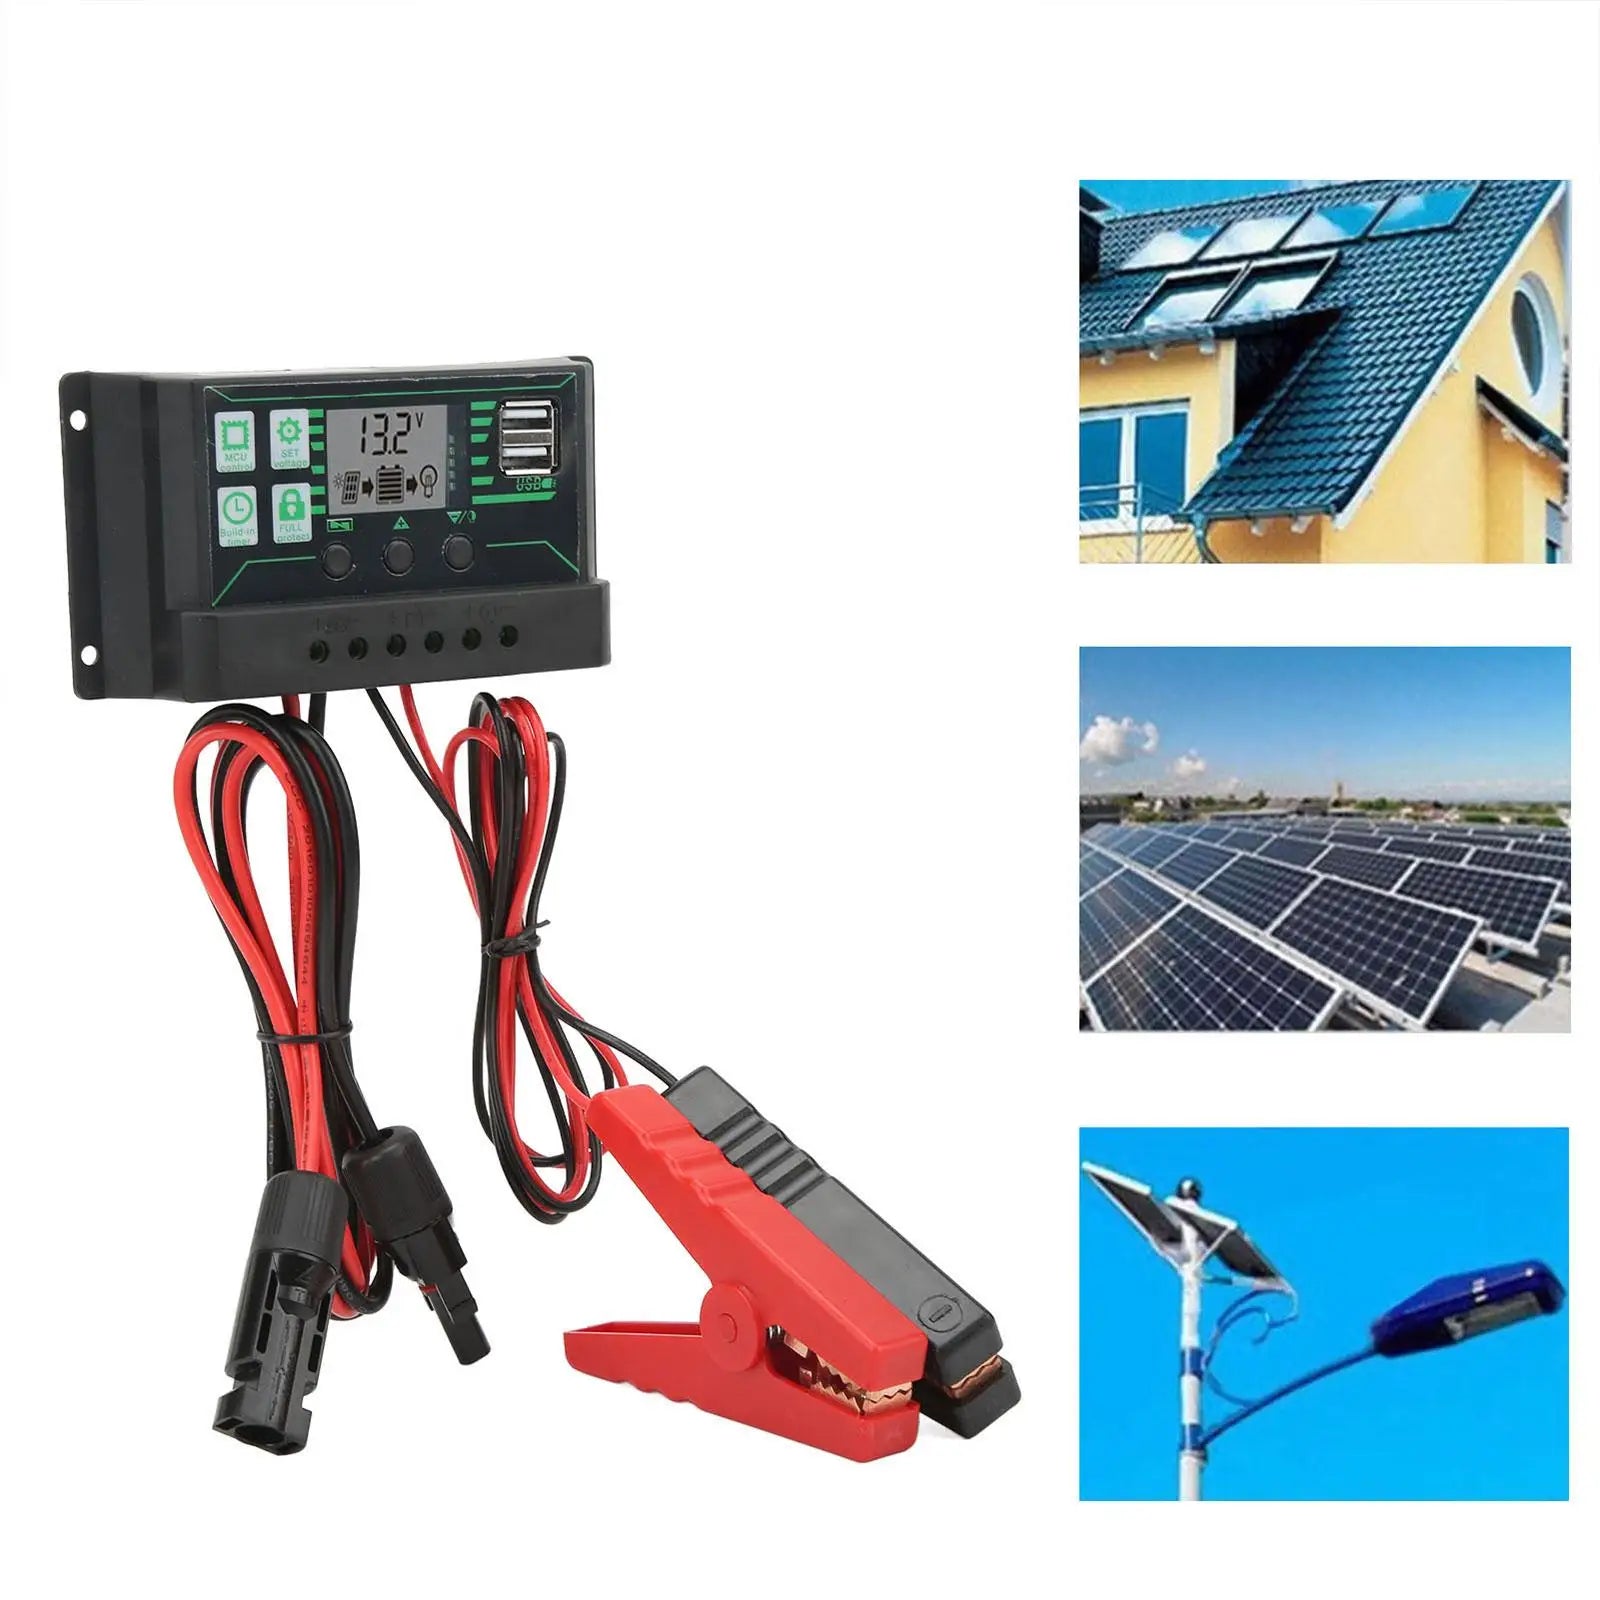 MPPT 10/20/30/60/100A Solar Charge Controller, Solar charge controller with wide LCD screen, regulating battery charging and solar panel input.